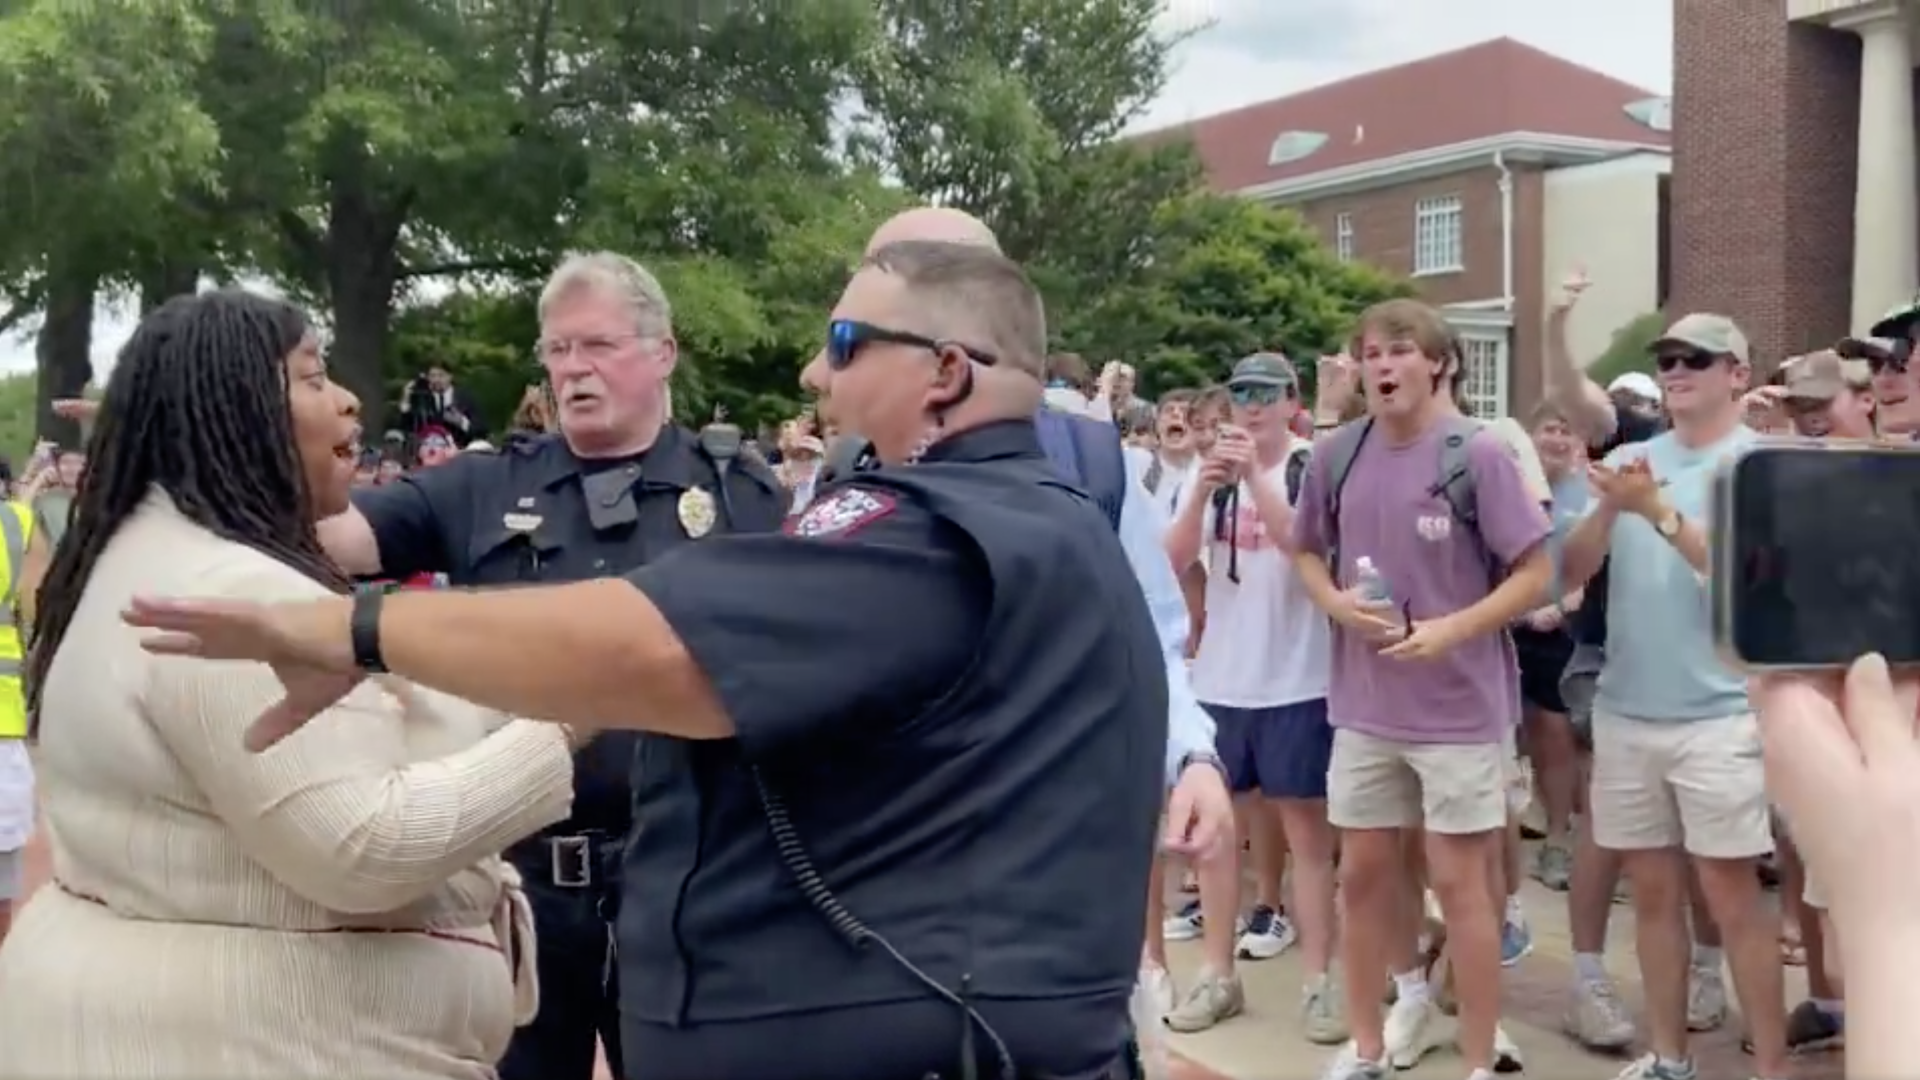 Ole Miss students taunt Black woman with monkey noises